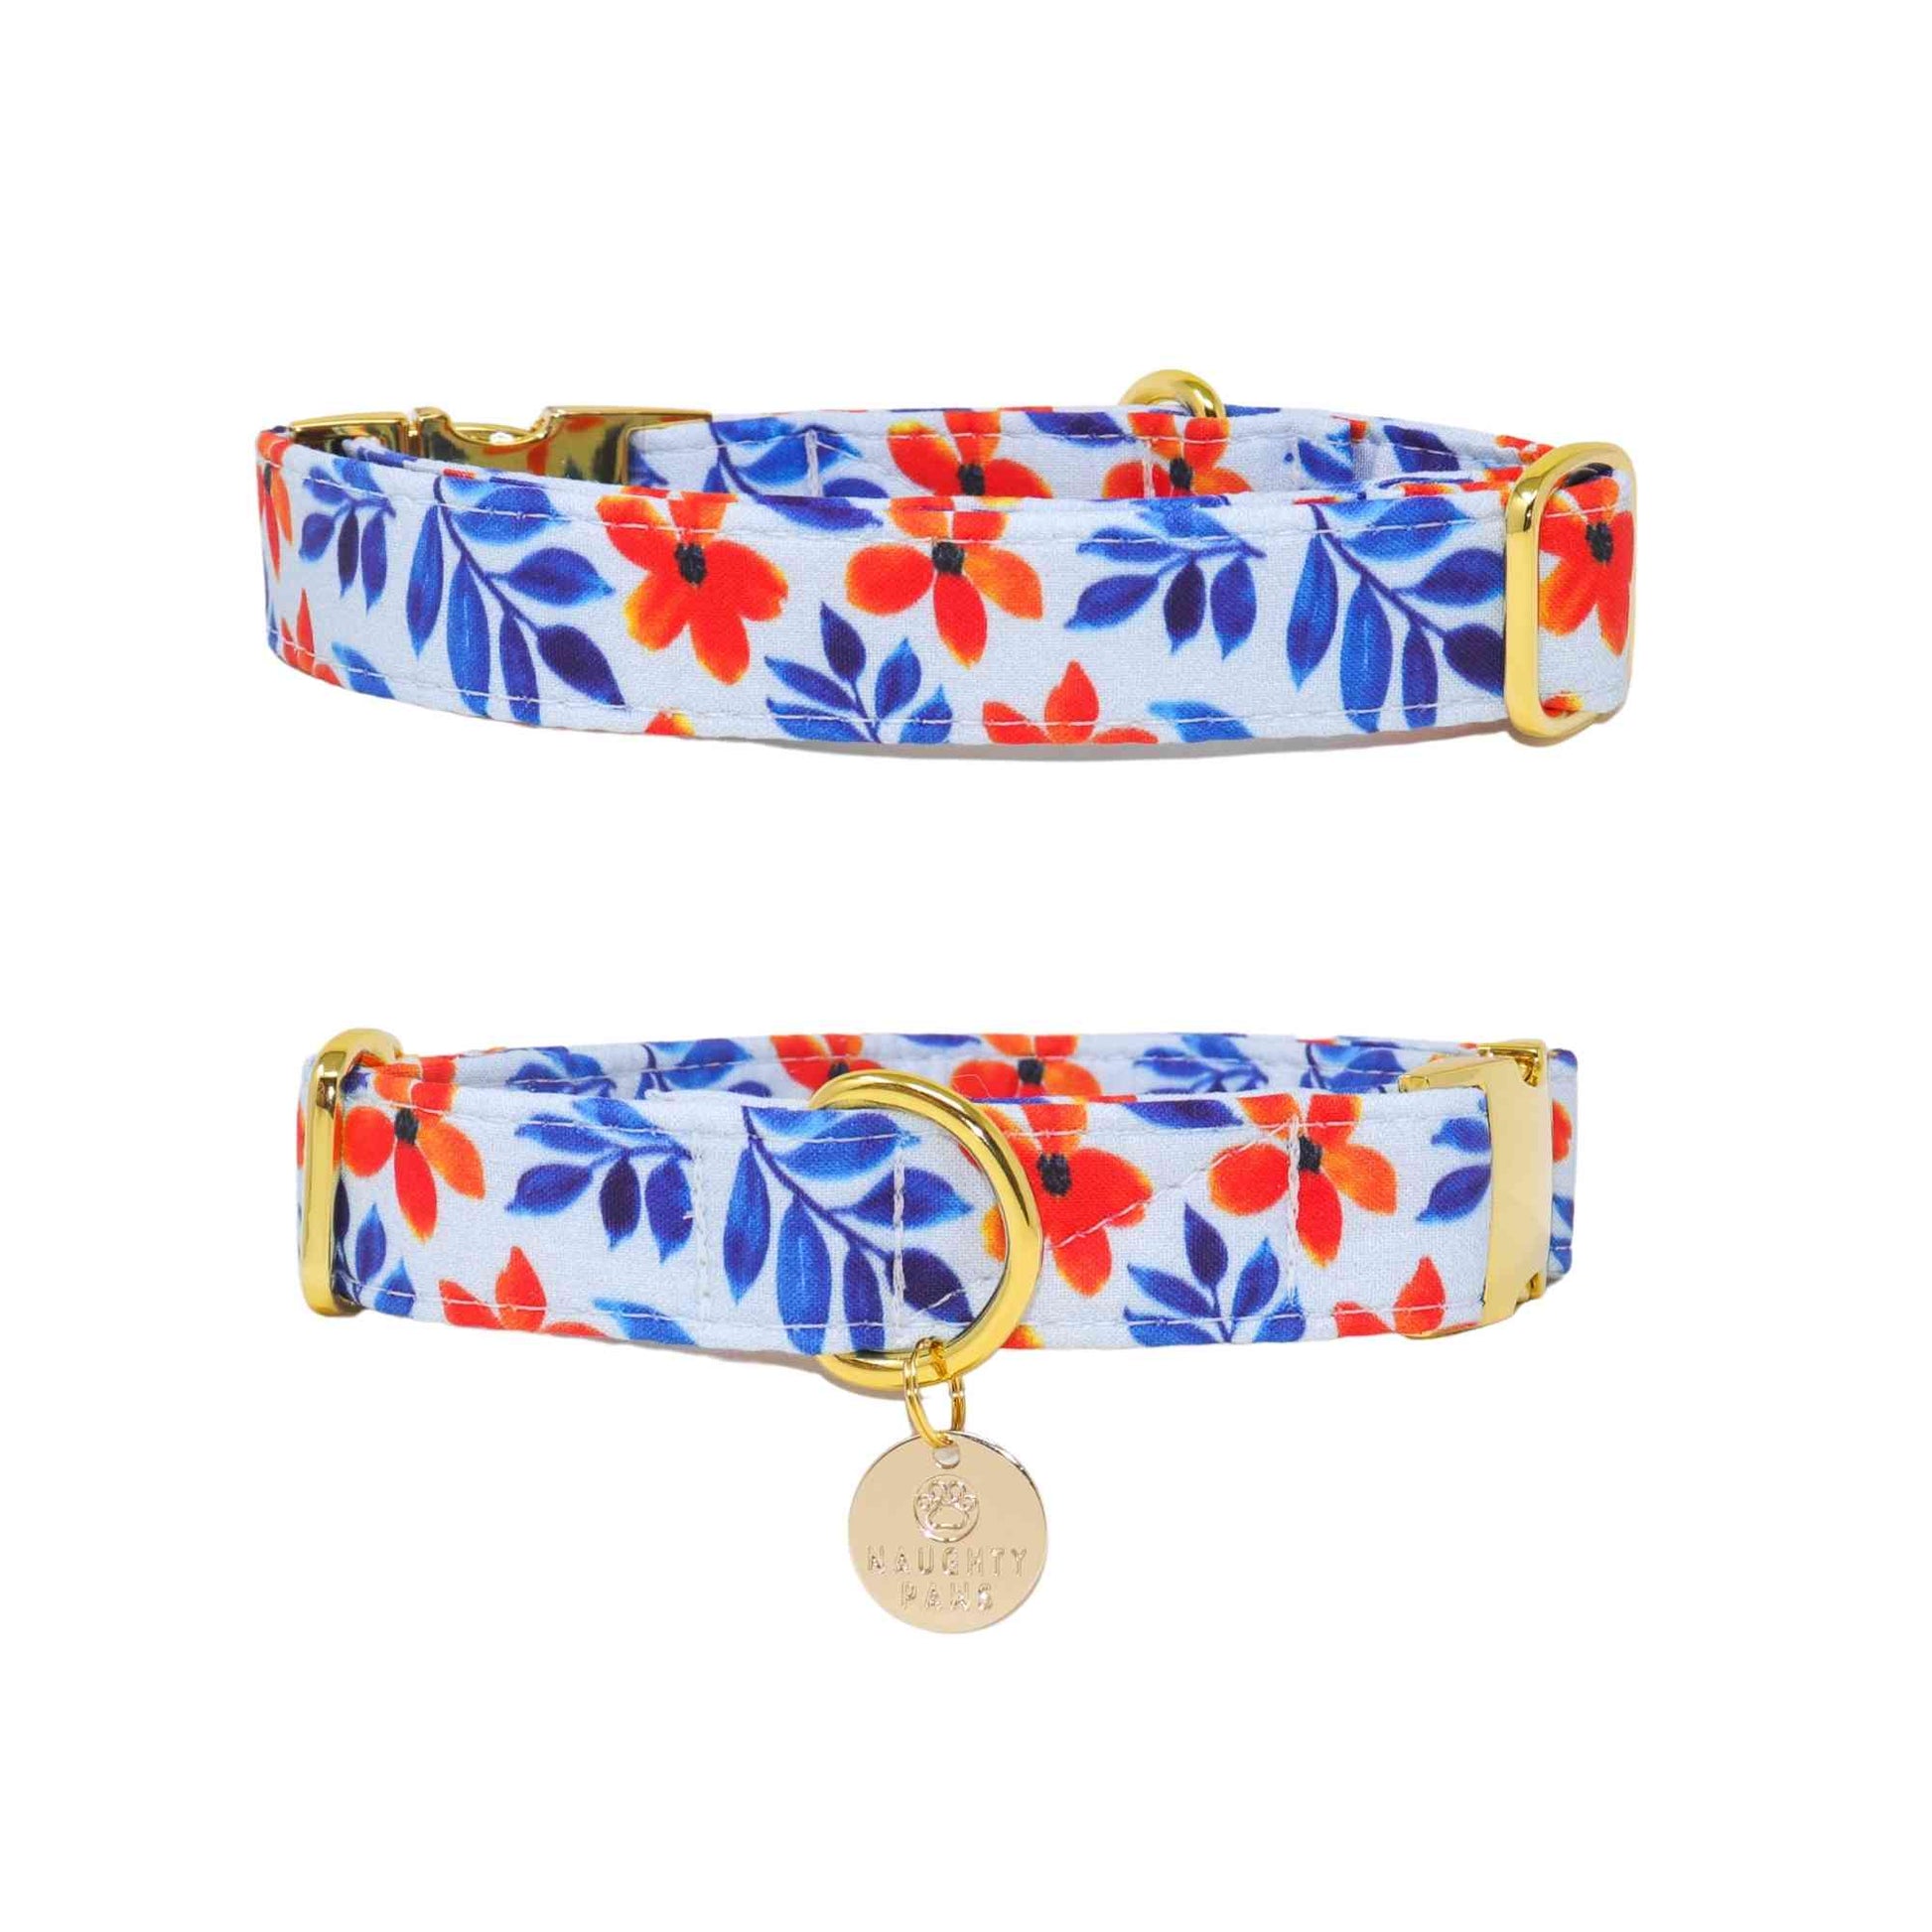 Crafted with care using high-quality materials, our collar is built to last and withstand the wear and tear of everyday use. The vibrant orange and blue floral pattern adds a pop of color to any outfit, making it the perfect accessory for sunny days and outdoor adventures. Whether you're taking your furry friend for a walk in the park or showing off their stylish new collar to friends and family, our "Bali" dog collar is sure to turn heads and make a statement.